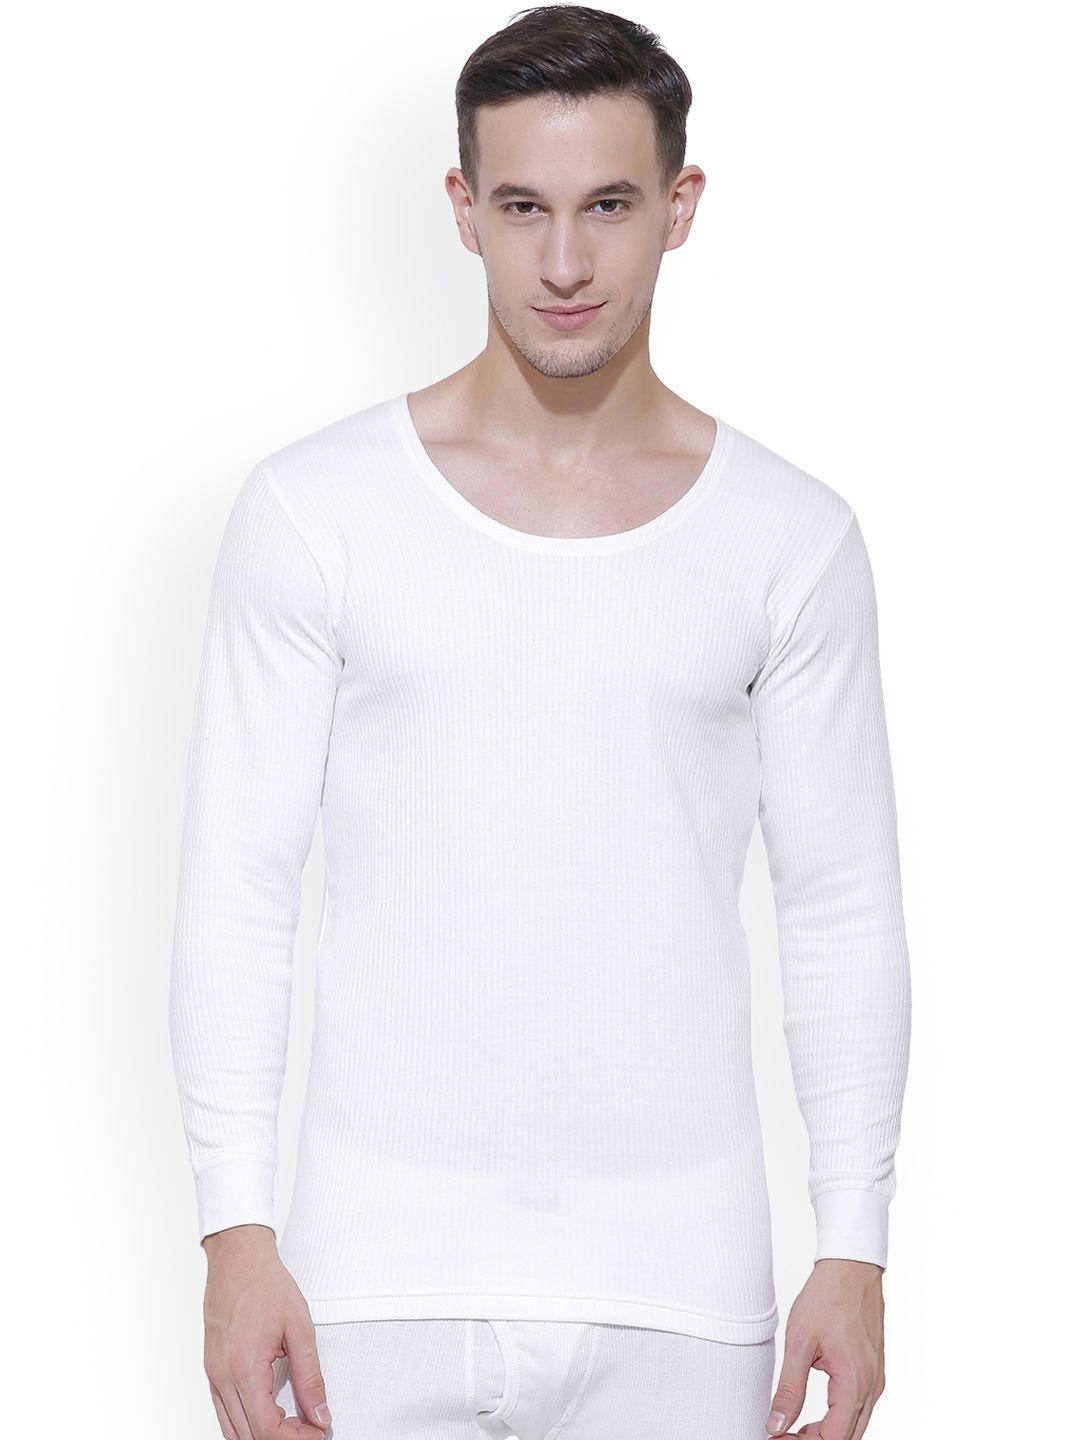 bodycare insider men off-white solid thermal top b101_80